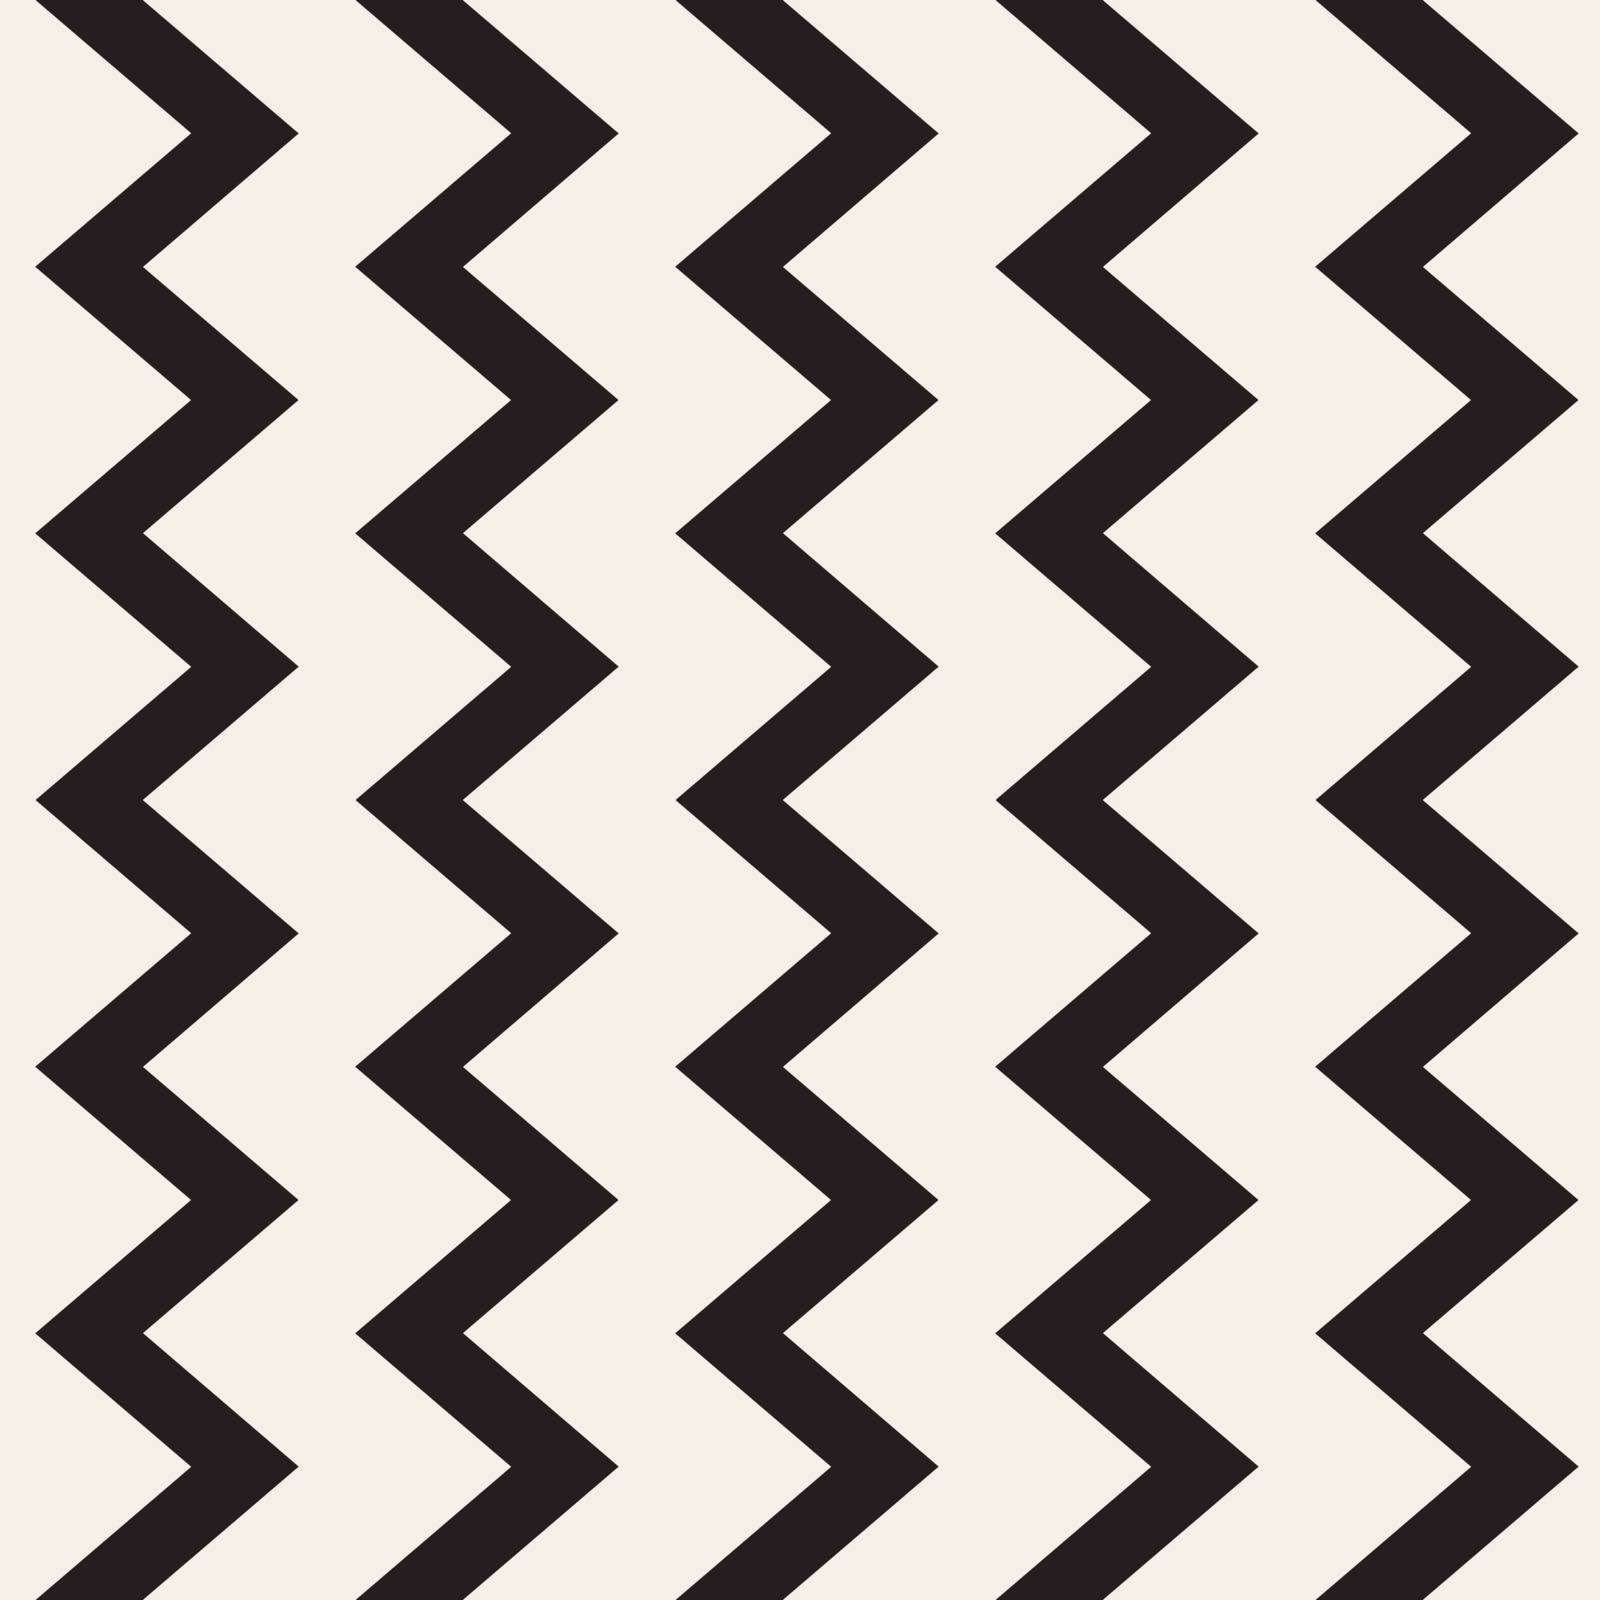 Vector Seamless Black and White ZigZag Lines Geometric Pattern by Samolevsky